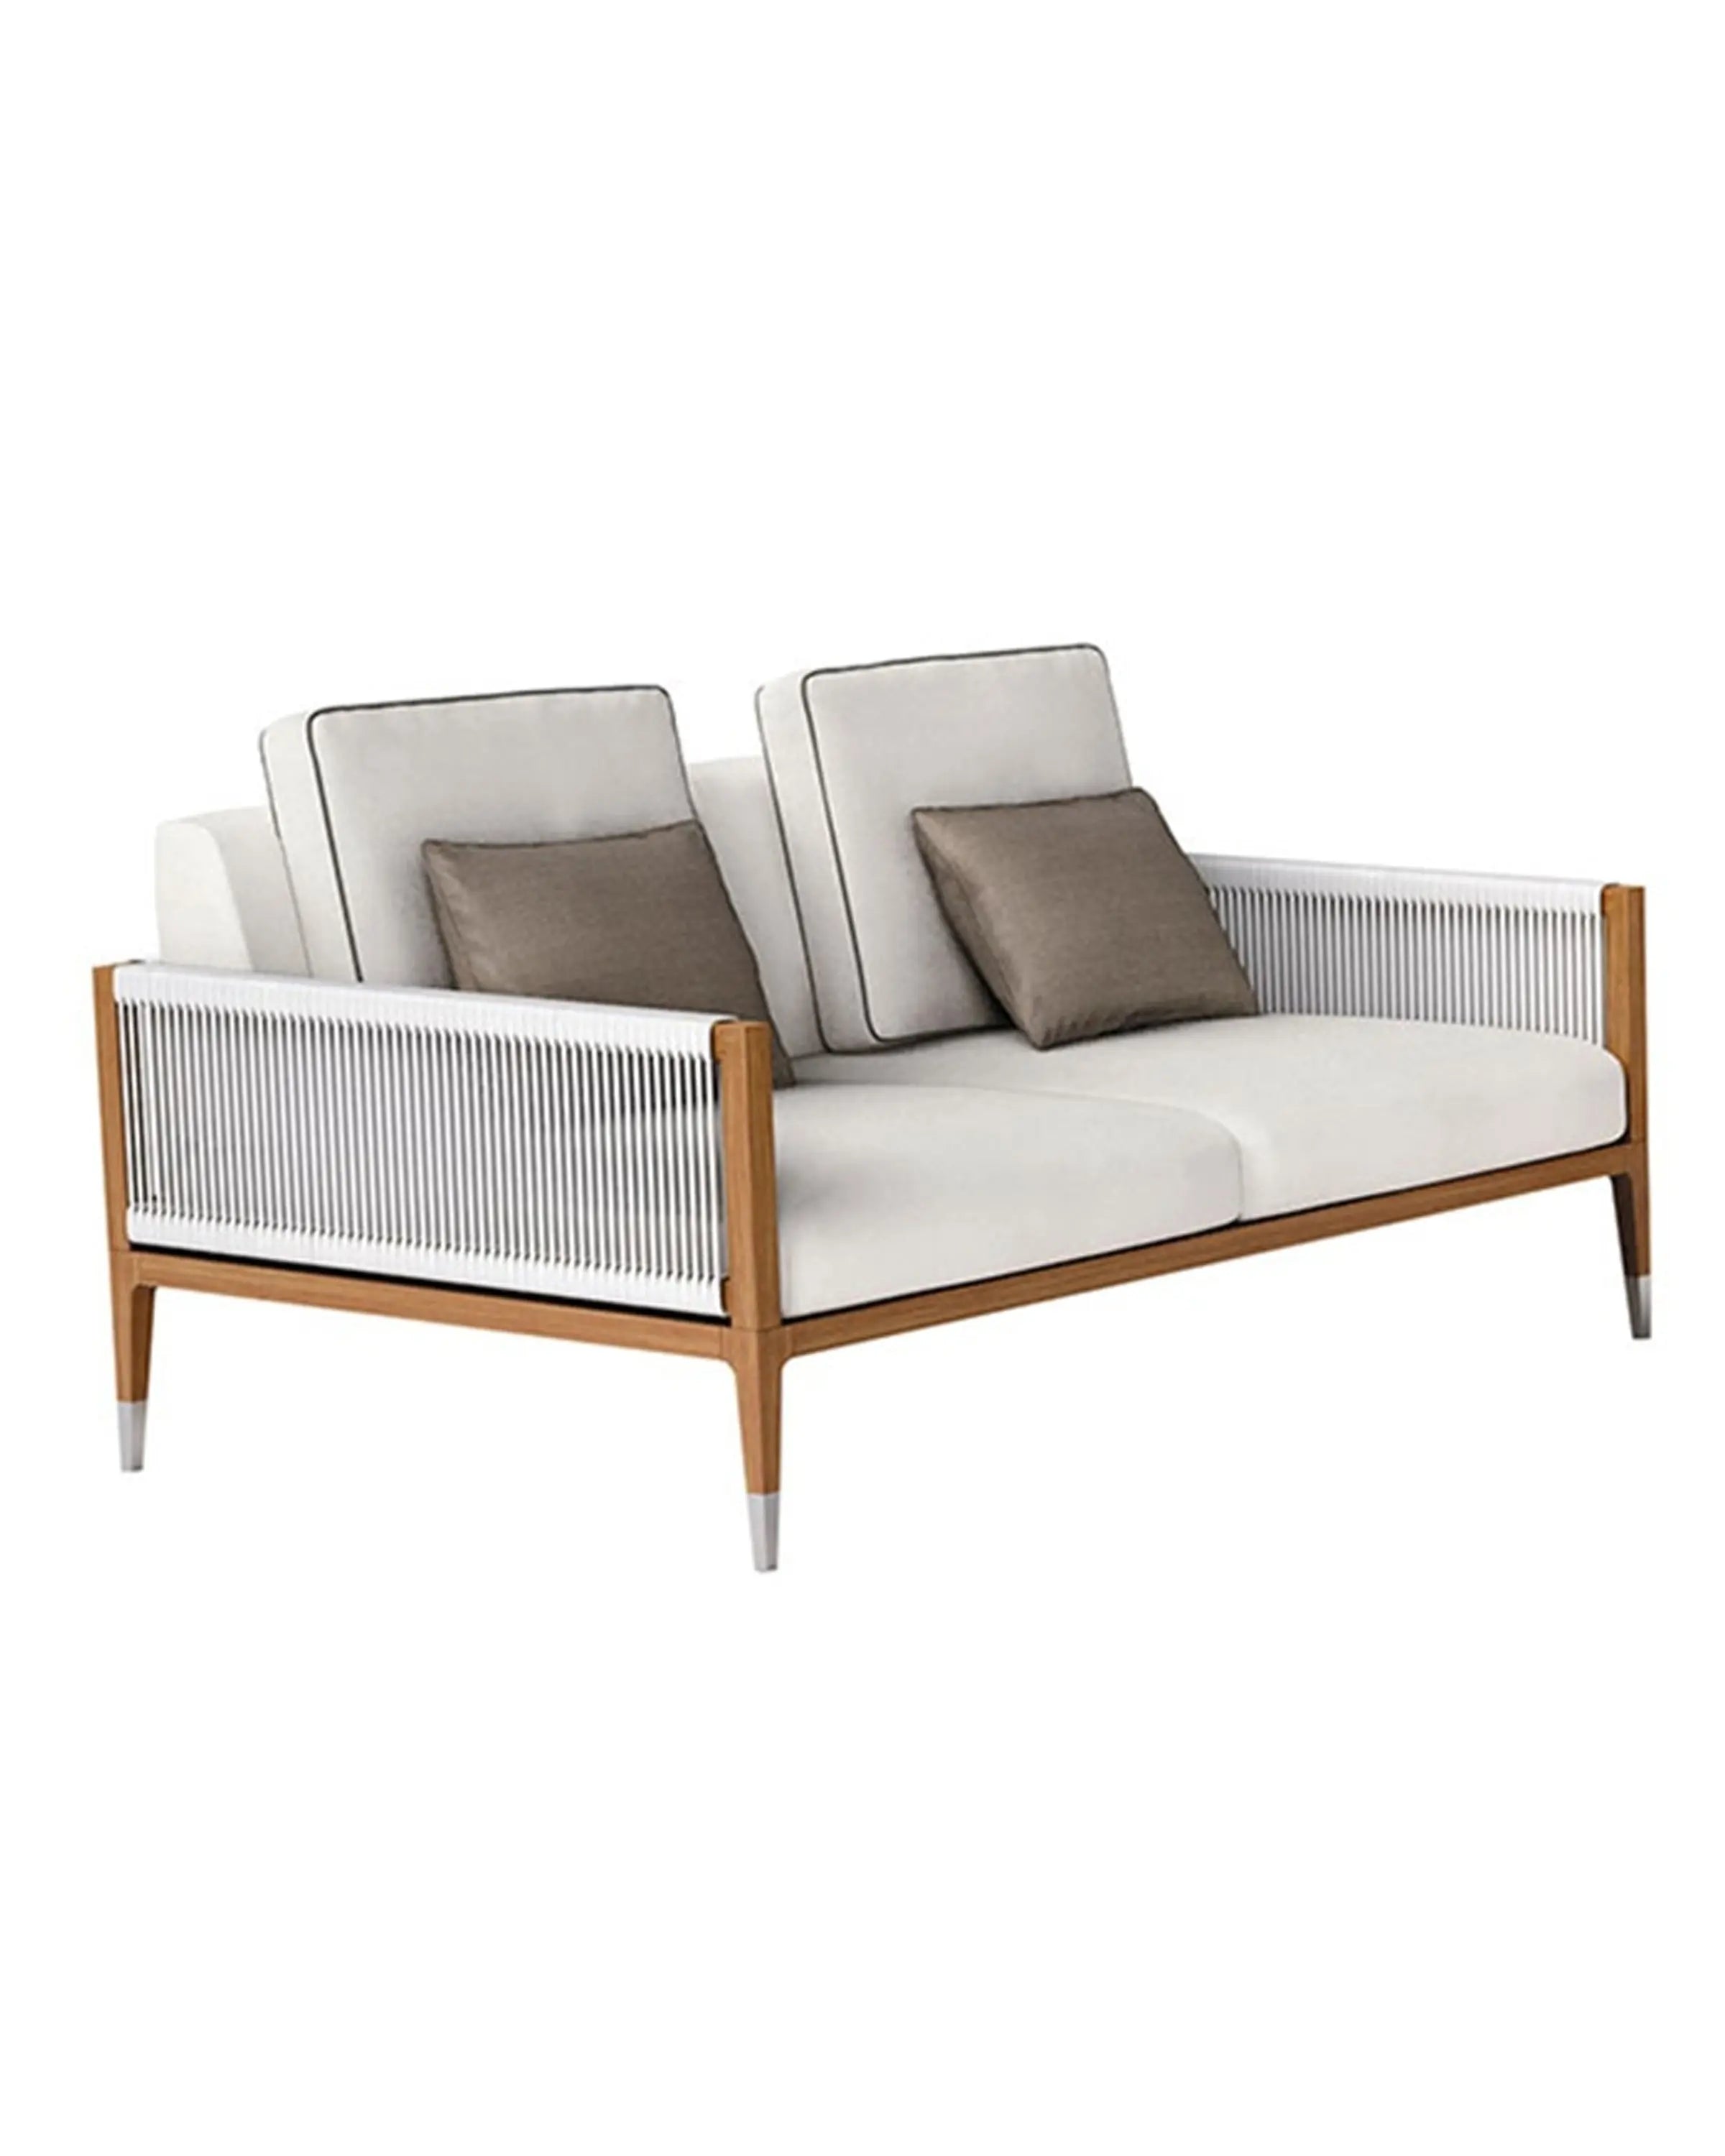 Bravo Sofa Set - Out Door Furniture ANGIE HOMES